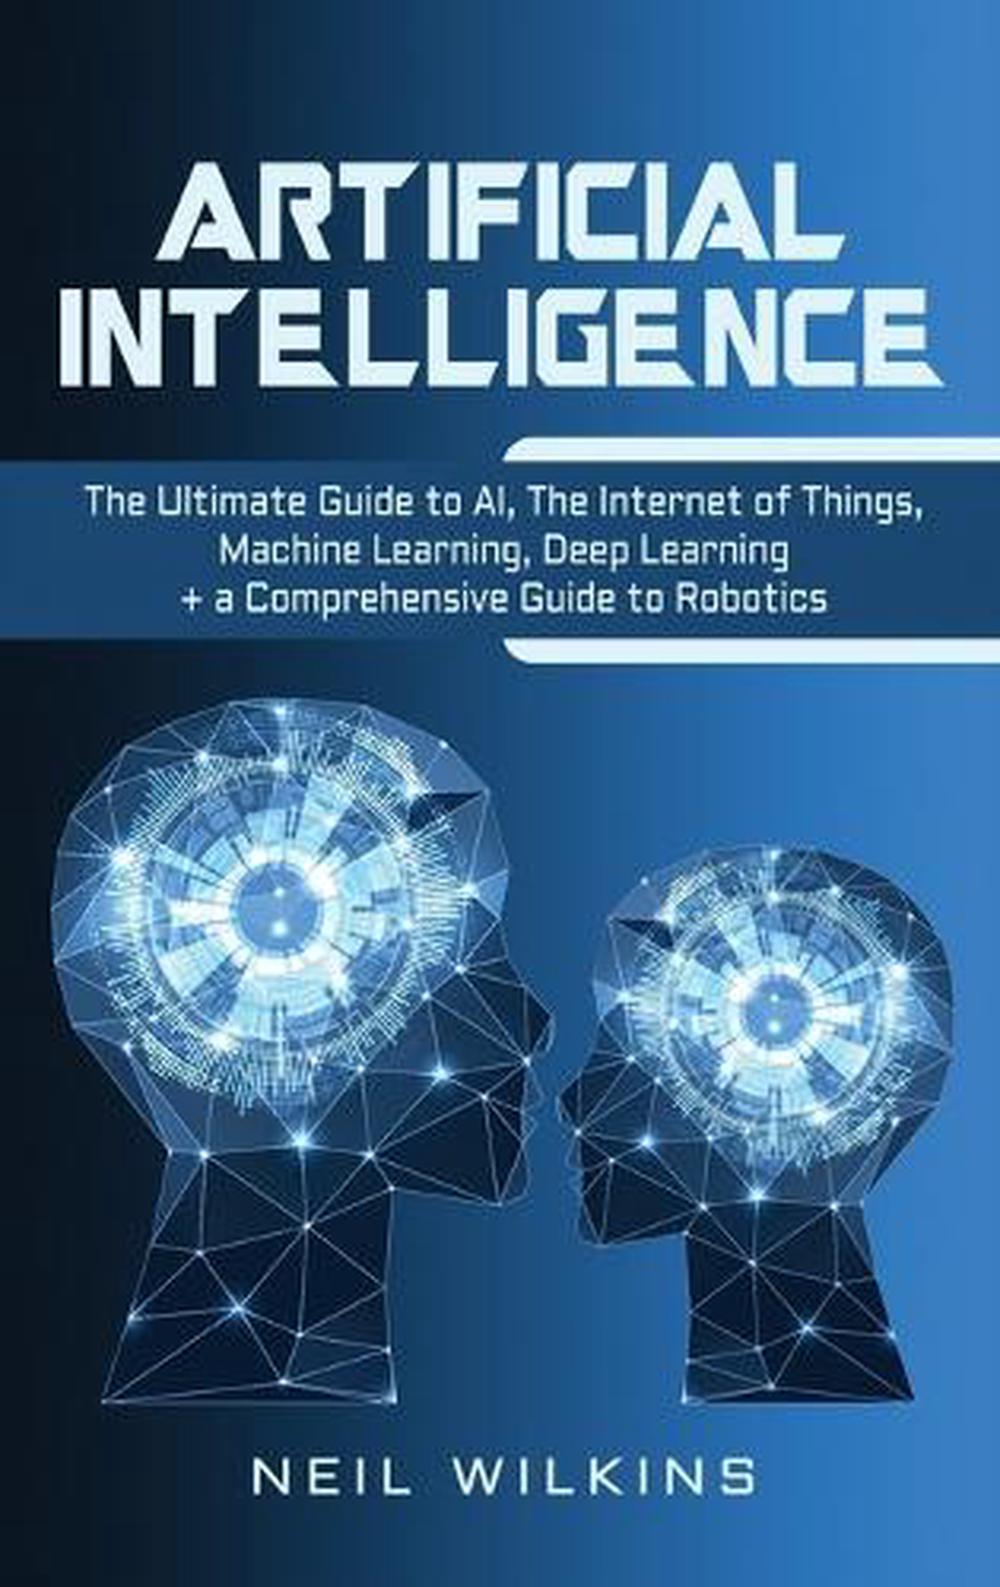 Artificial Intelligence by Wilkins Neil Wilkins (English) Hardcover